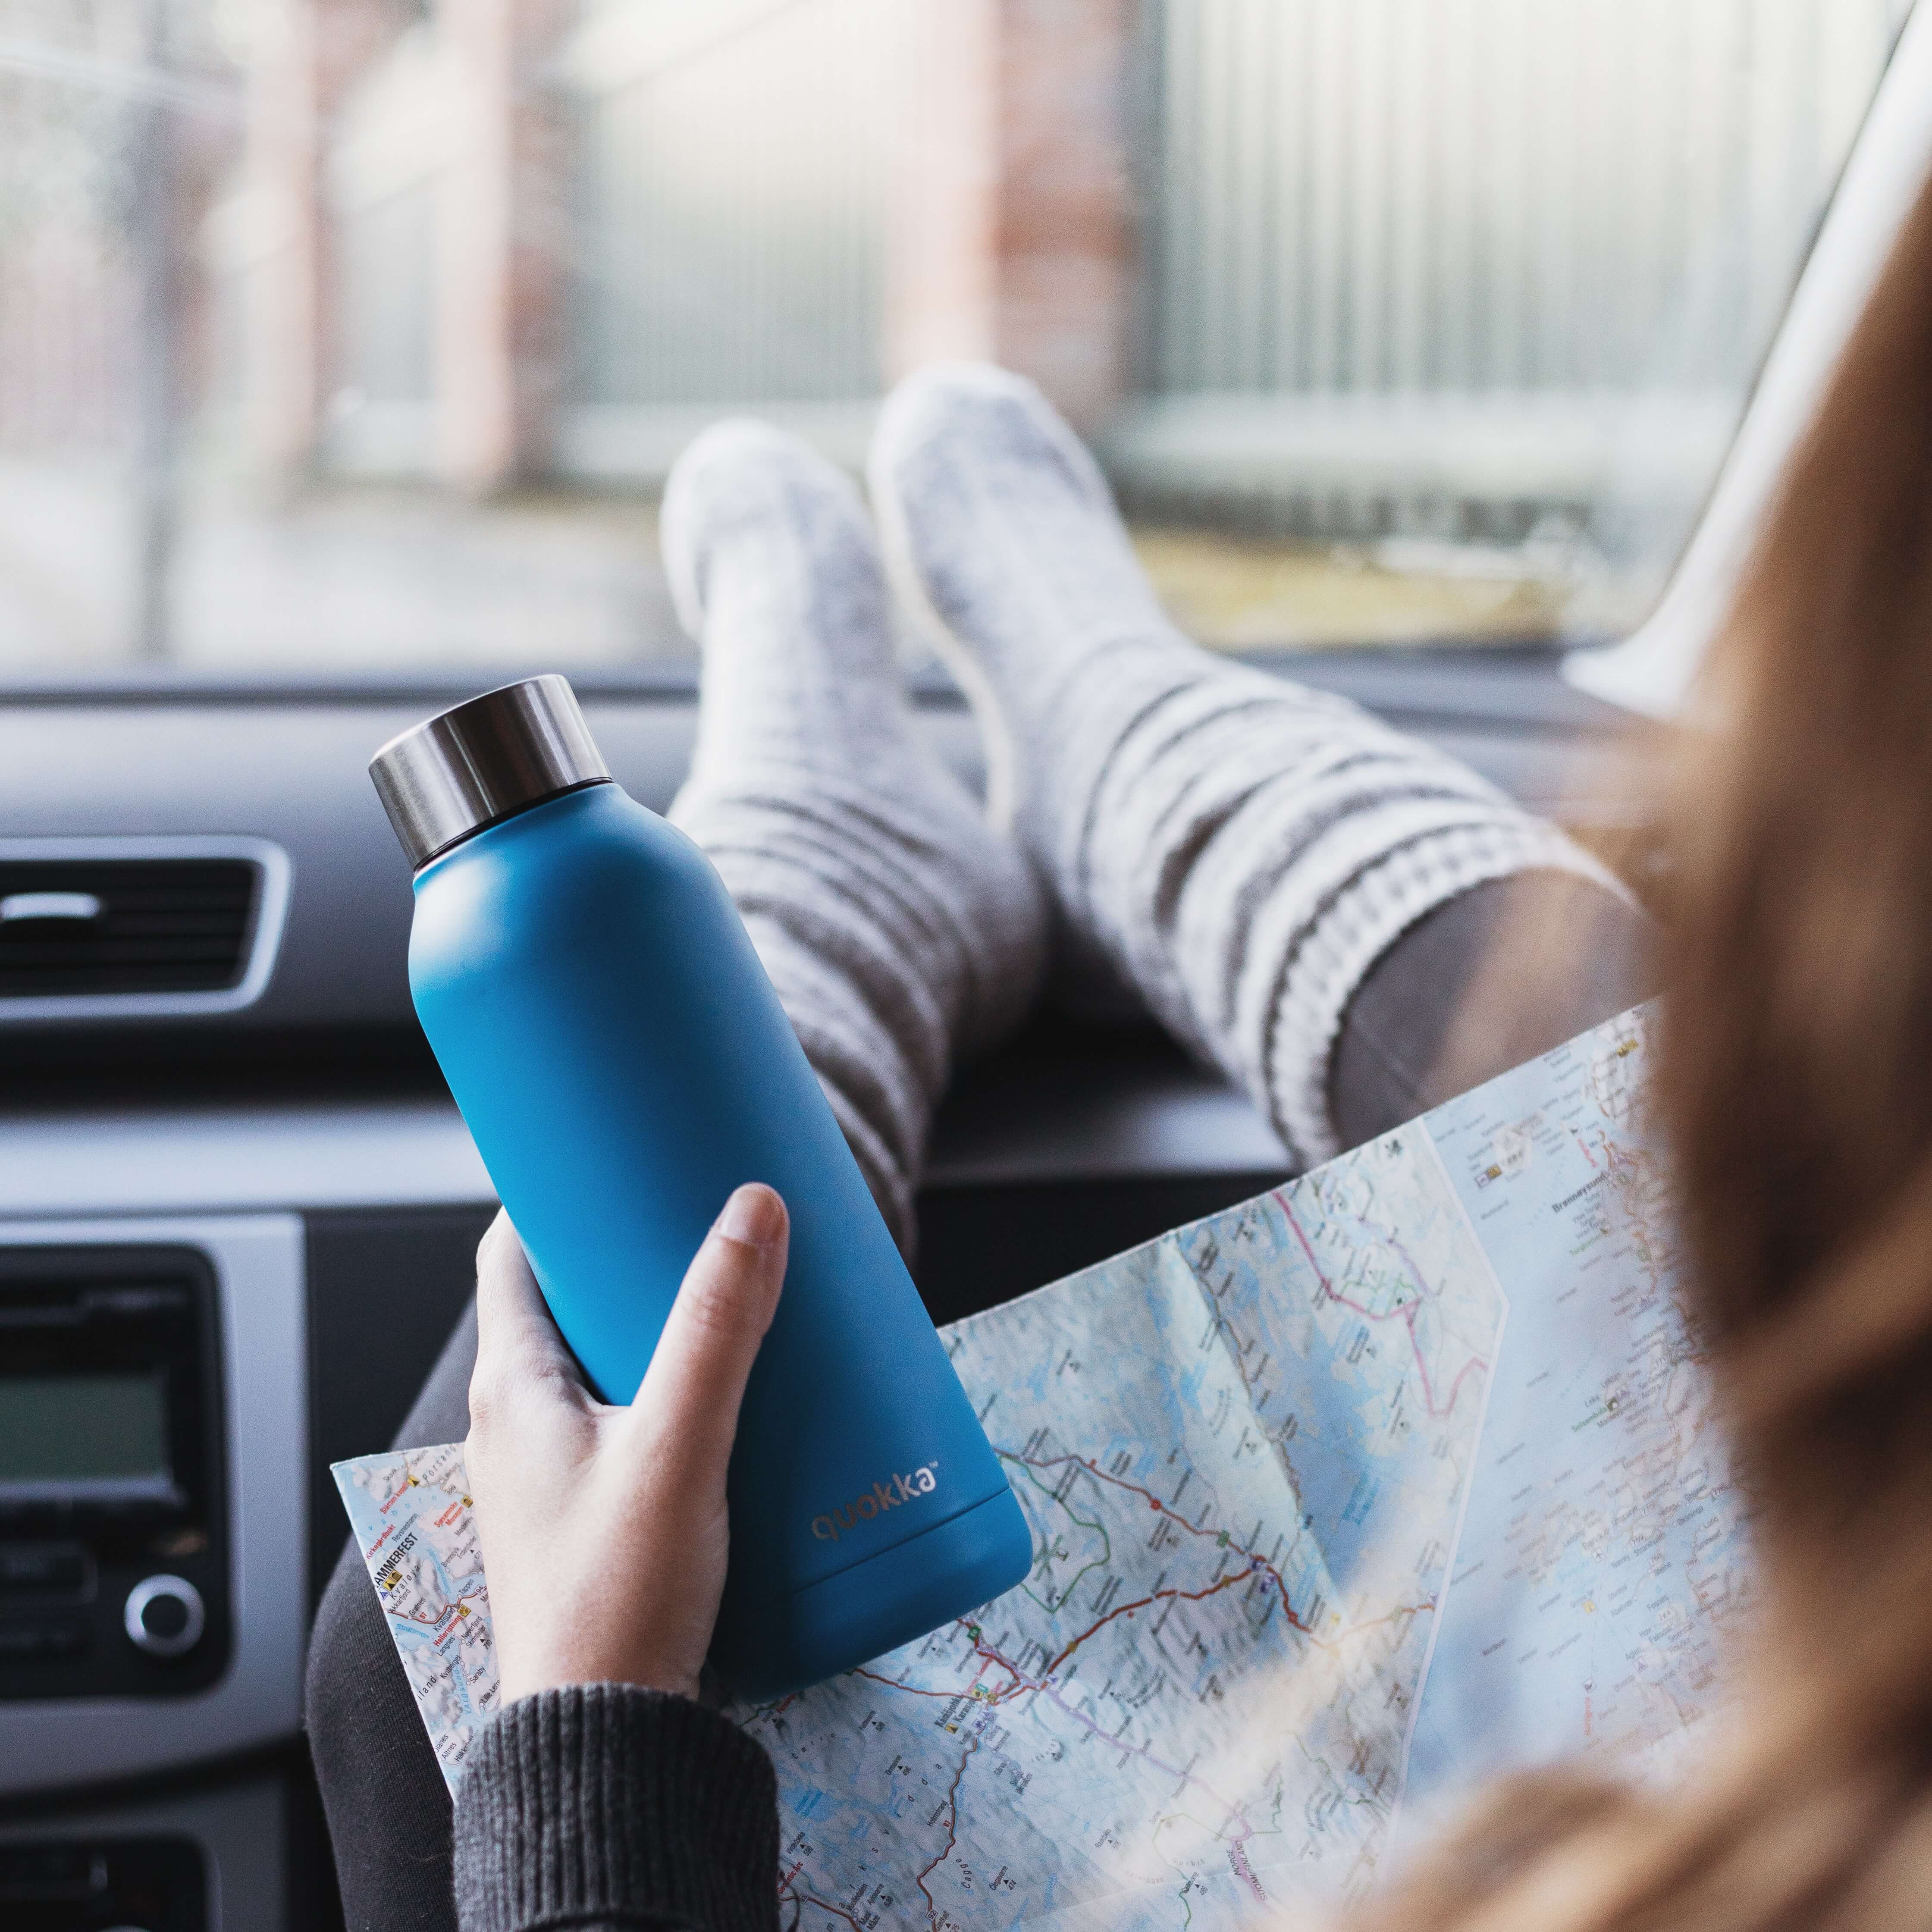 a woman consults a map while holding a water bottle and resting her feet on the dashboard of the car